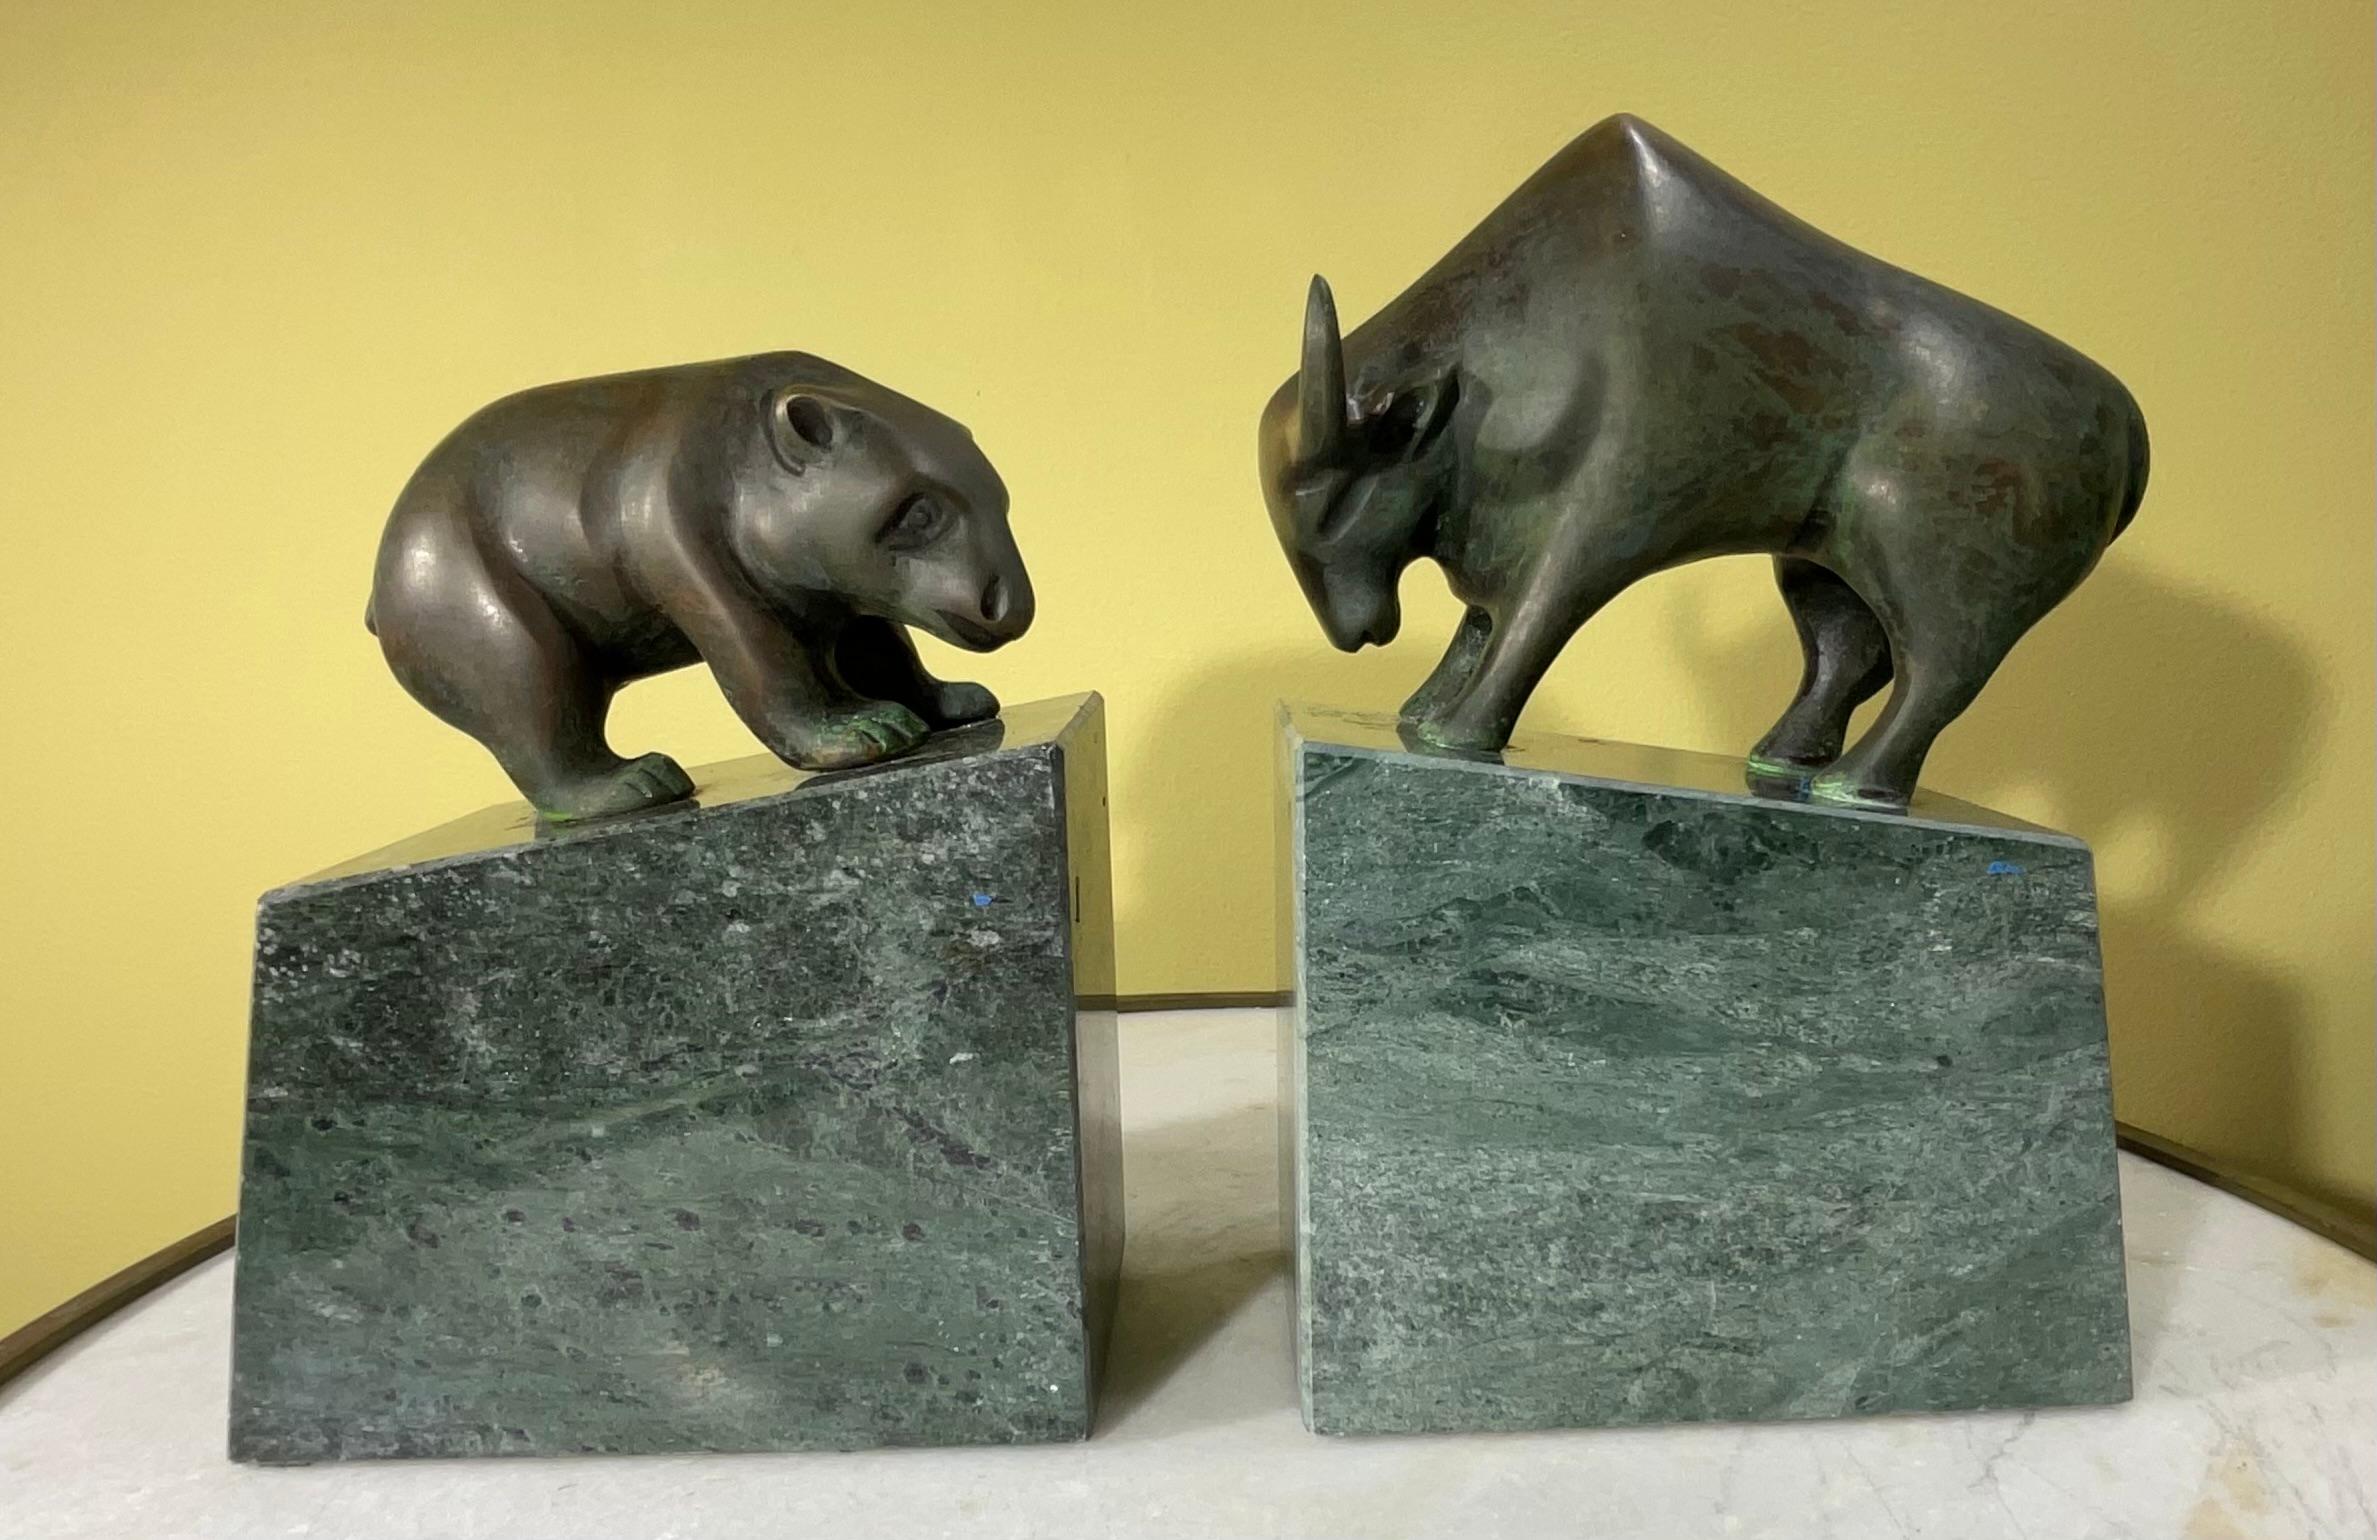 Fun pair of bull and bear bronze and green marble bookends, circa 1990s. The pair are in good condition the bull and the bear. The green marble is in Great gift for any Wall Street trader, stock broker , or day trader.
Sizes :
5”.5 x 3” x7”.5 h
5” x